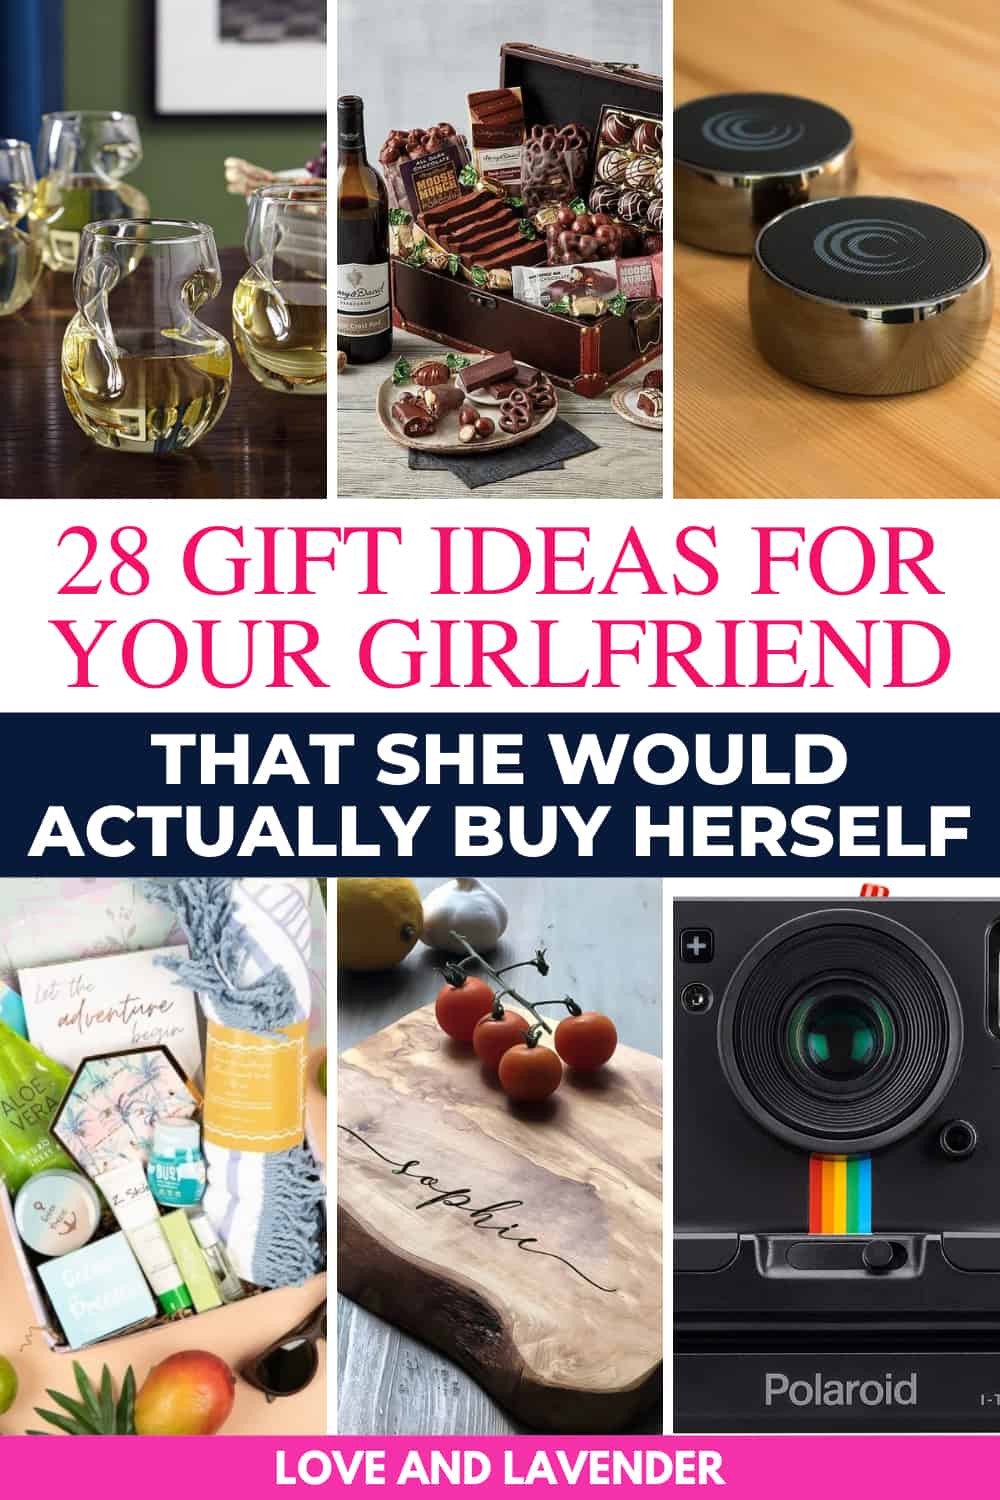 28 Gift Ideas for Your Girlfriend that She Would Actually Buy Herself